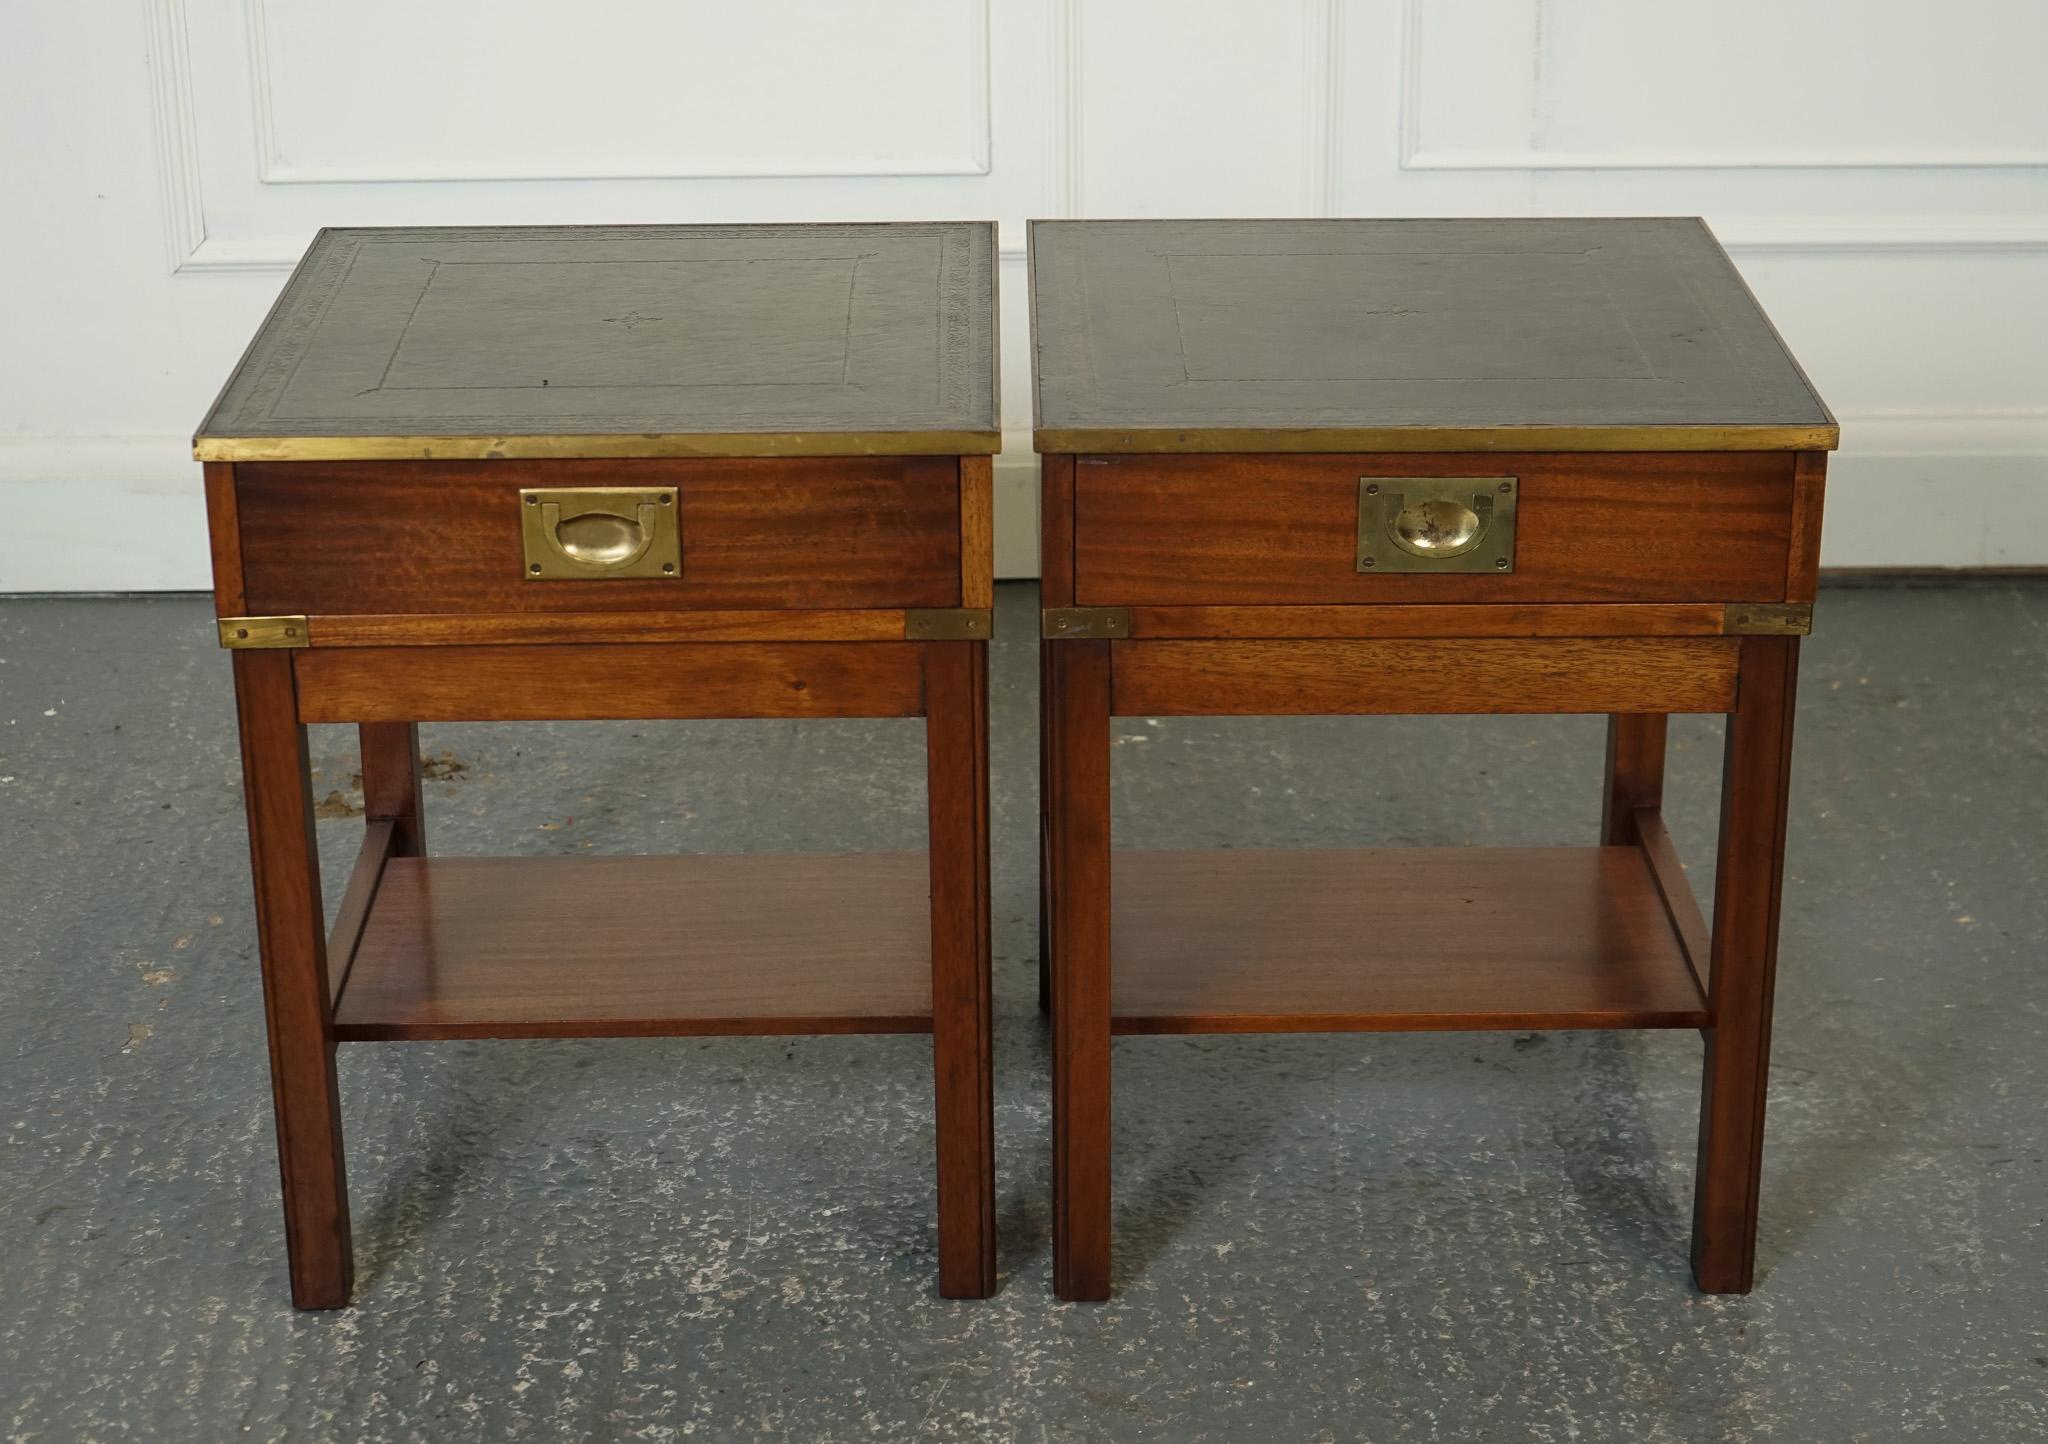 
We are delighted to offer for sale this Pair of Military Campaign Nightstands Side End Tables.

The pair of Military Campaign Bedside Tables Nightstands features an antique green leather top, giving them a classic and vintage look. 

These tables